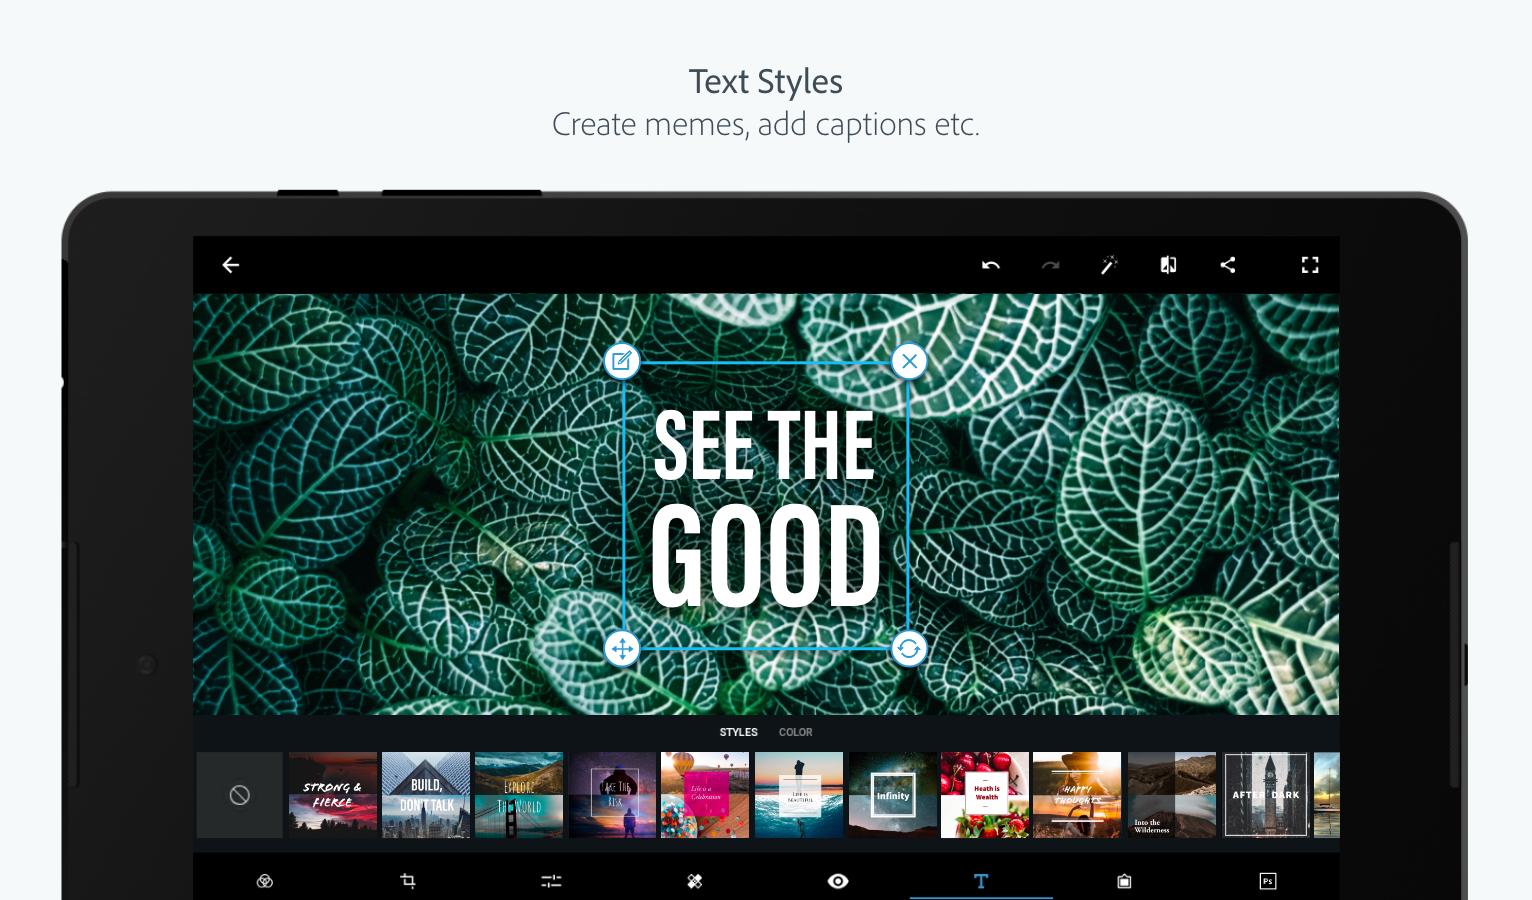 adobe photoshop express app for android free download